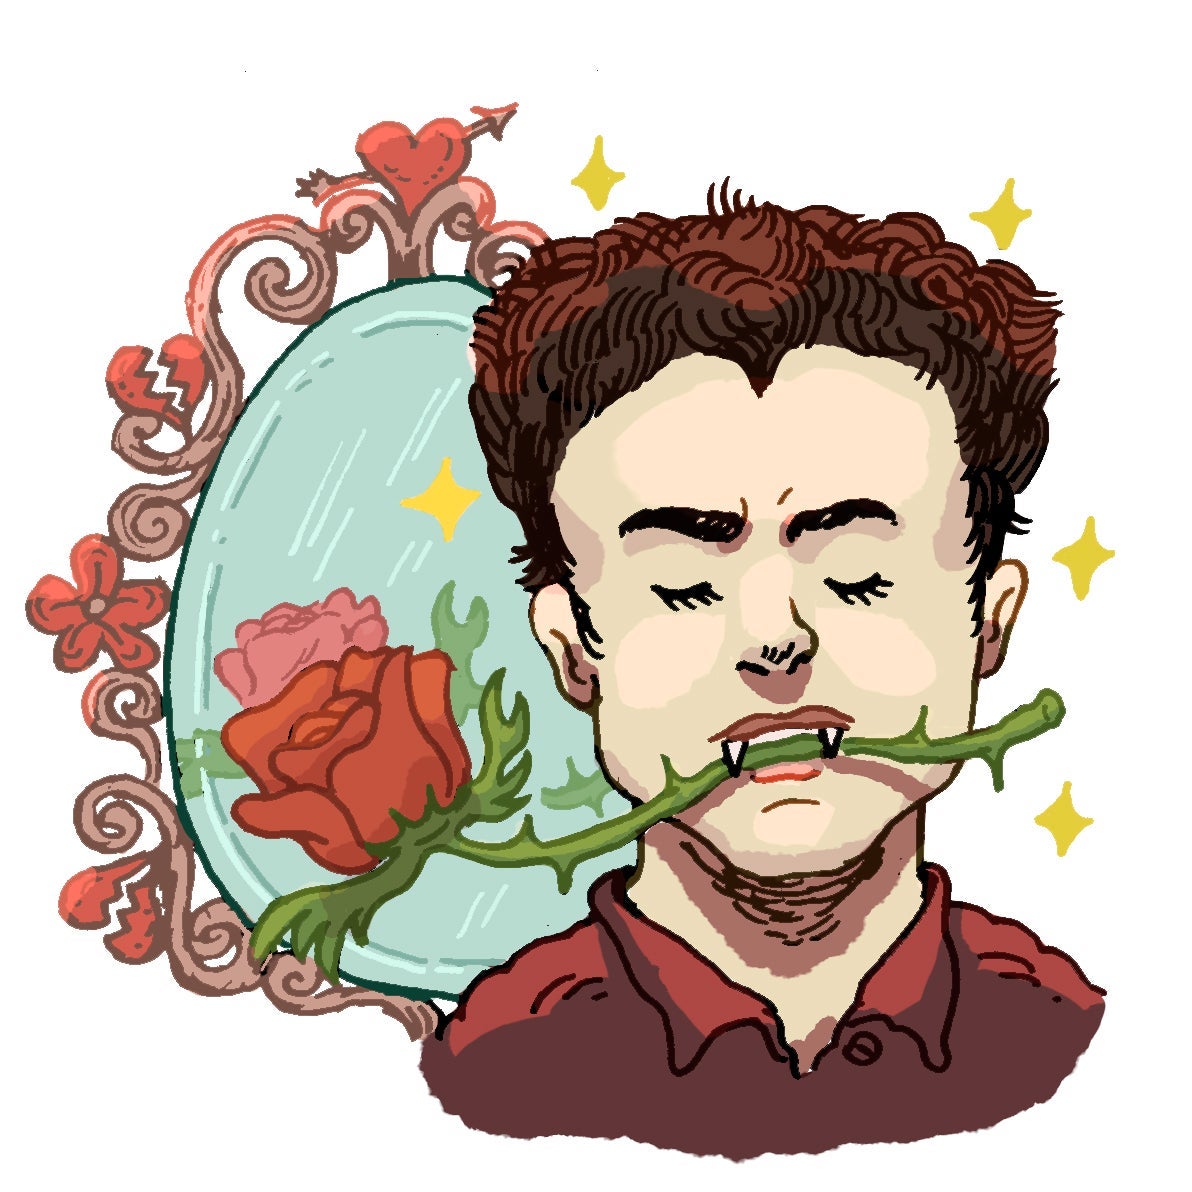 Illustration of Edward Cullen with a rose in his teeth.